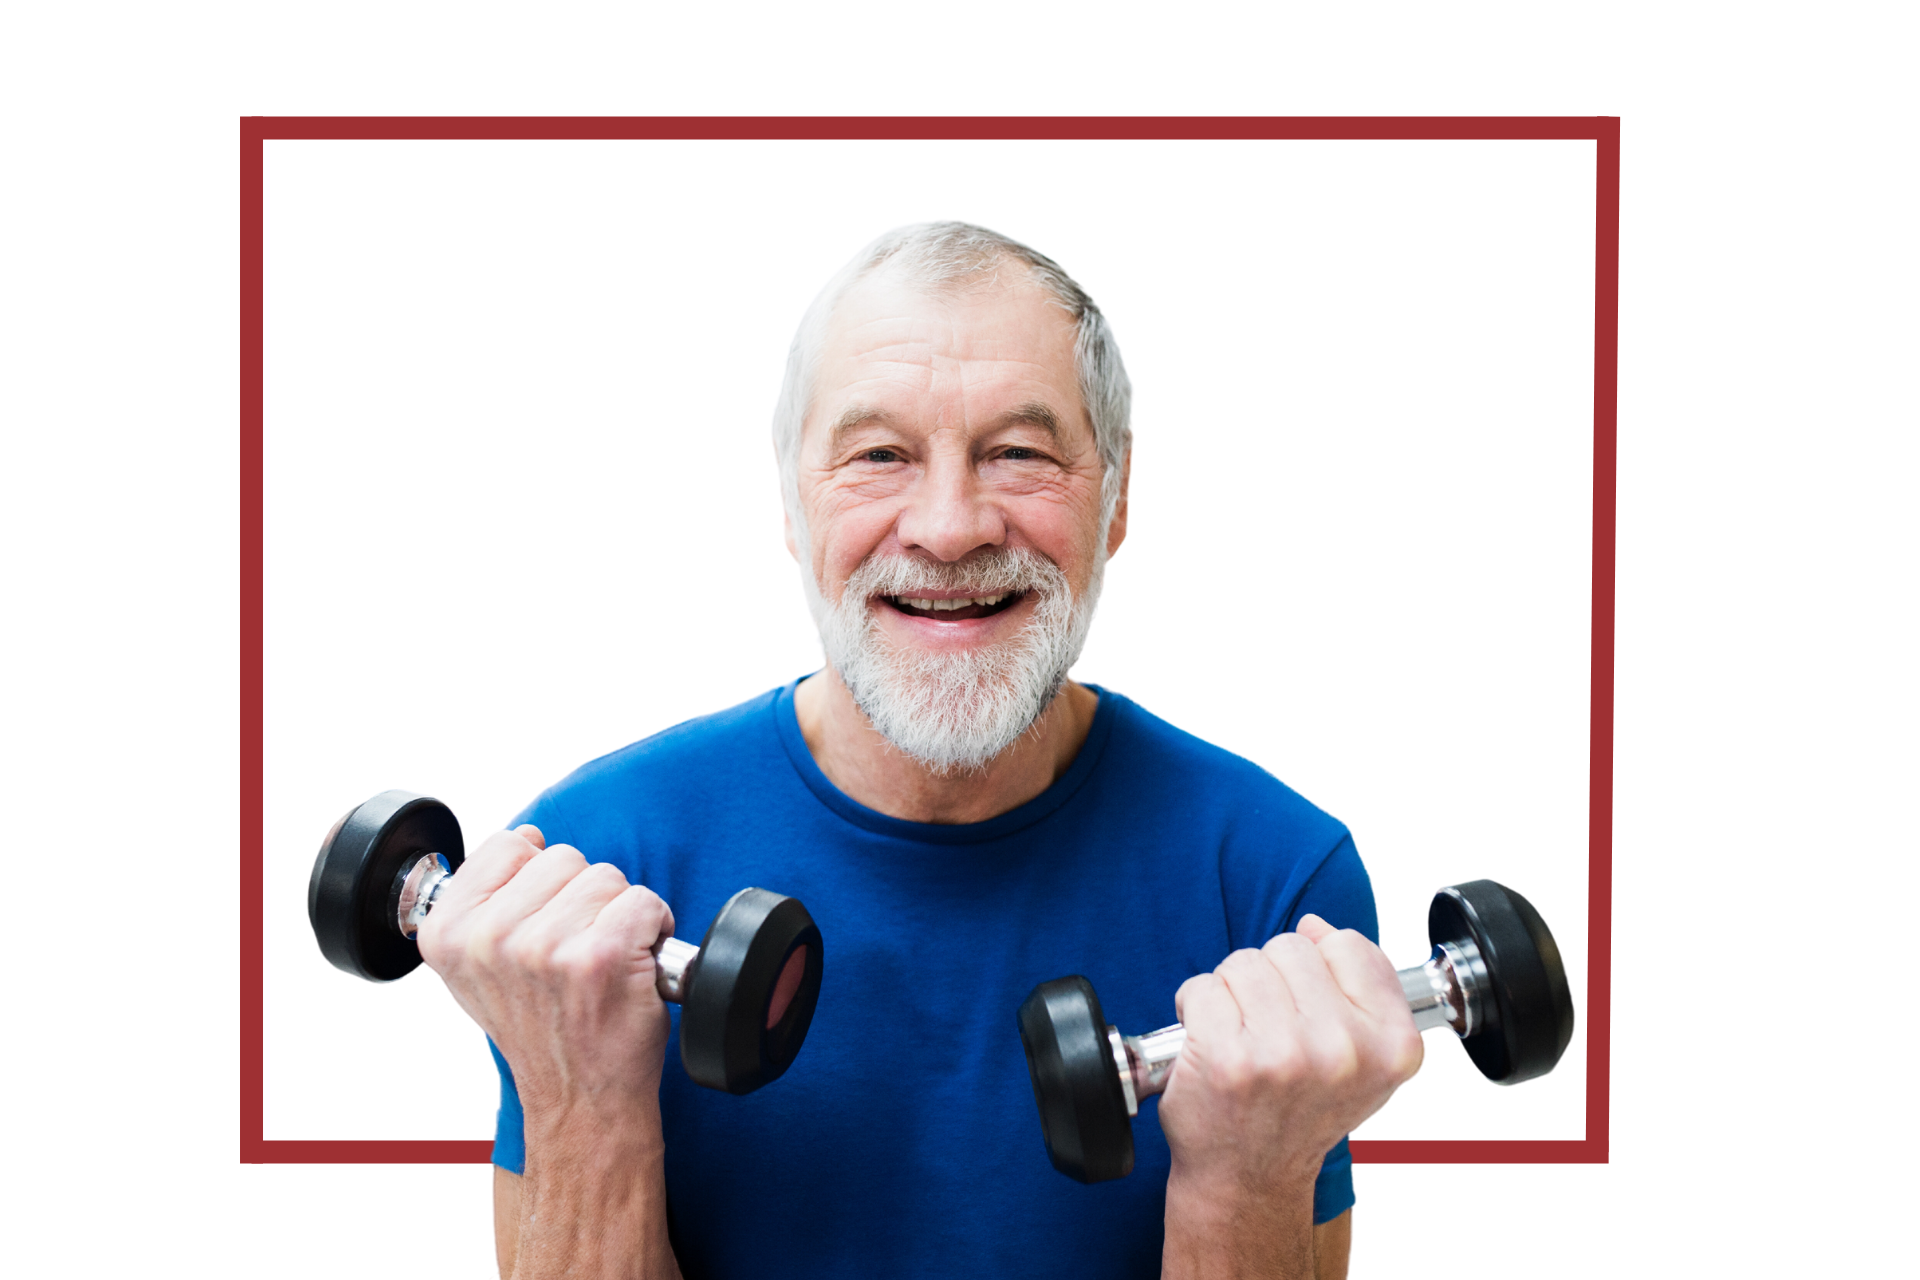 older man with white beard smiling and lifting weights